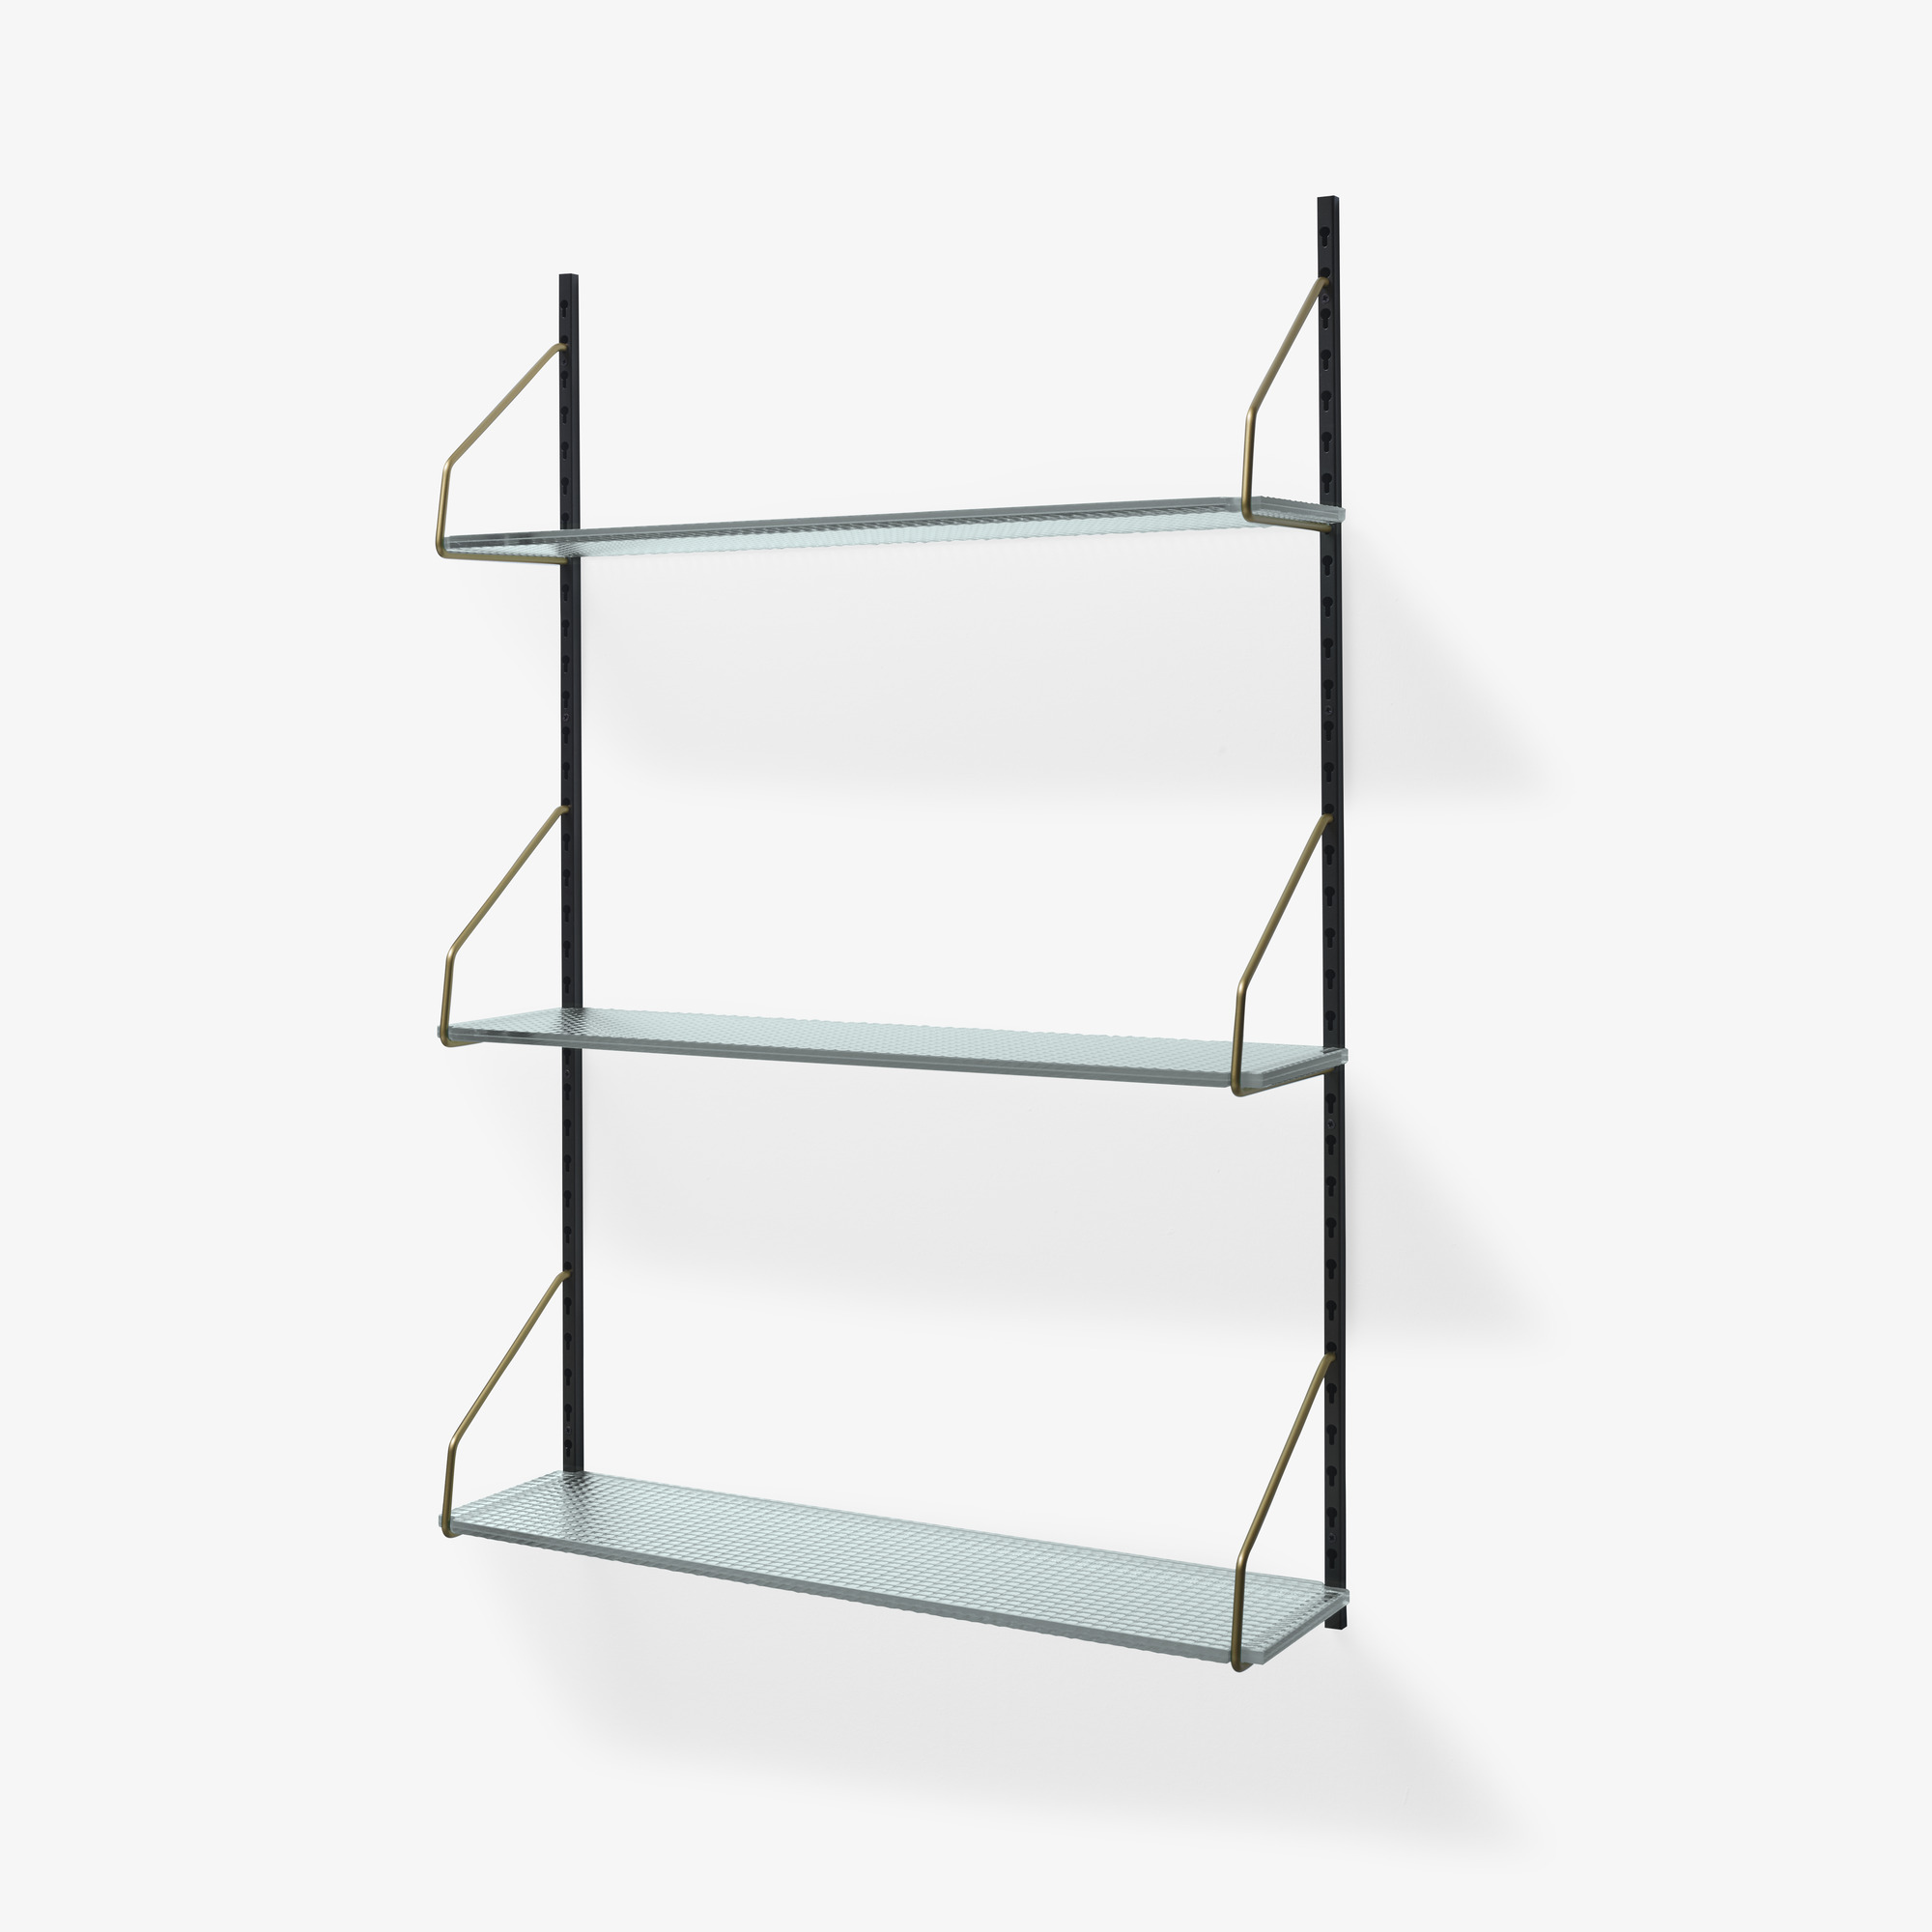 Image Wall mounted bookcase with glass shelves  2